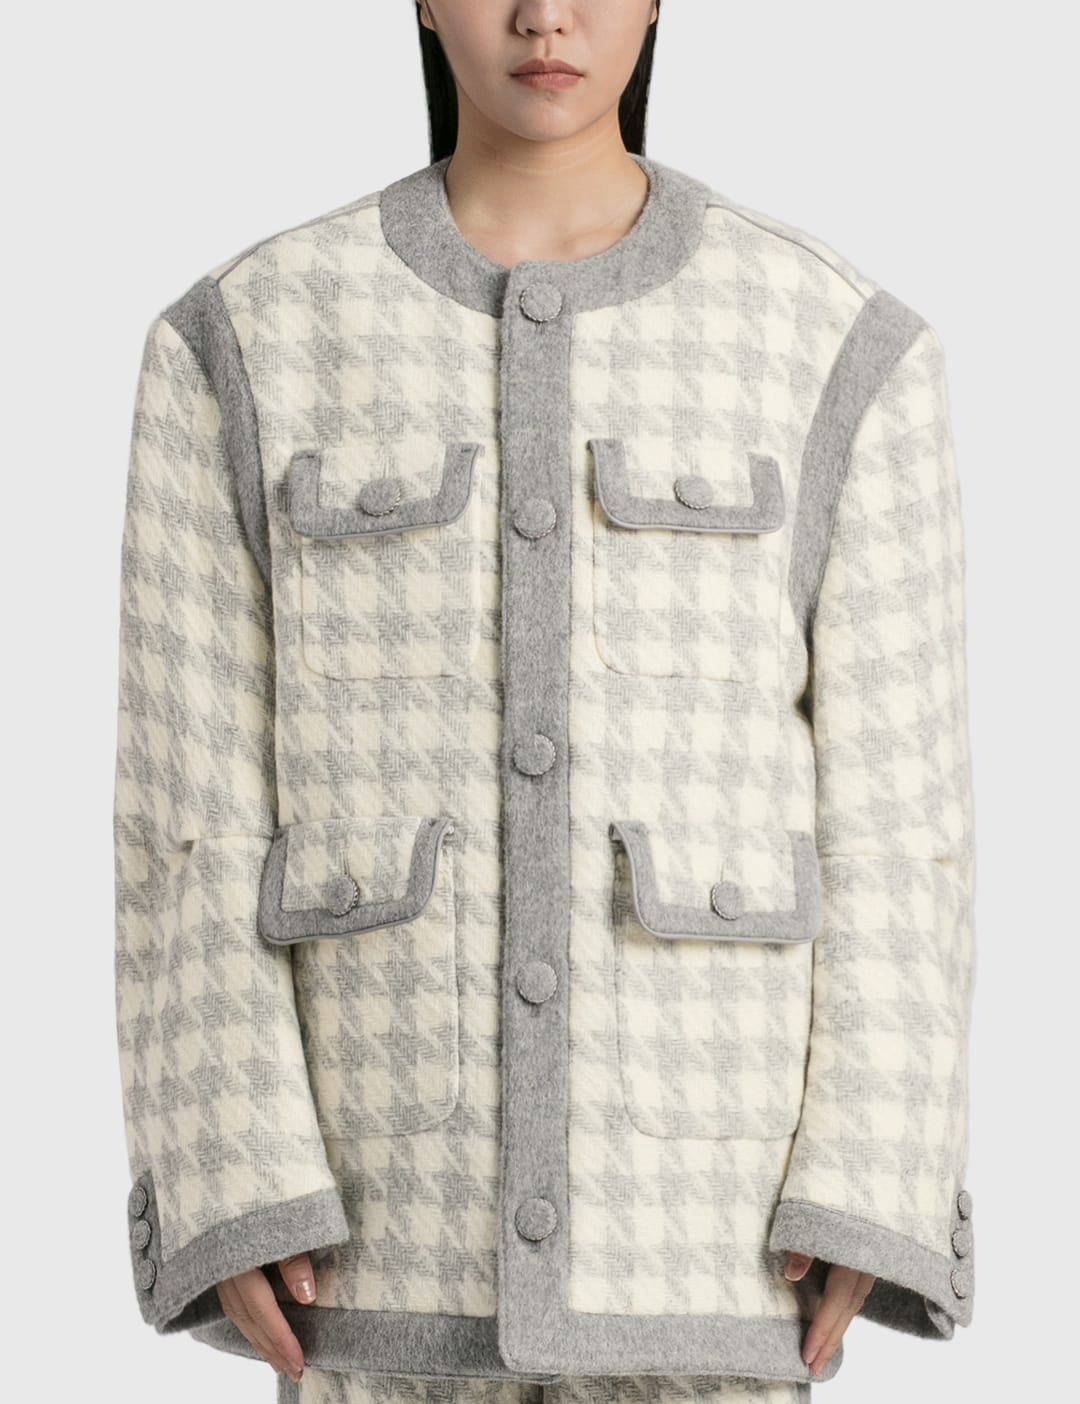 Ader Error - Beron Coat | HBX - Globally Curated Fashion and